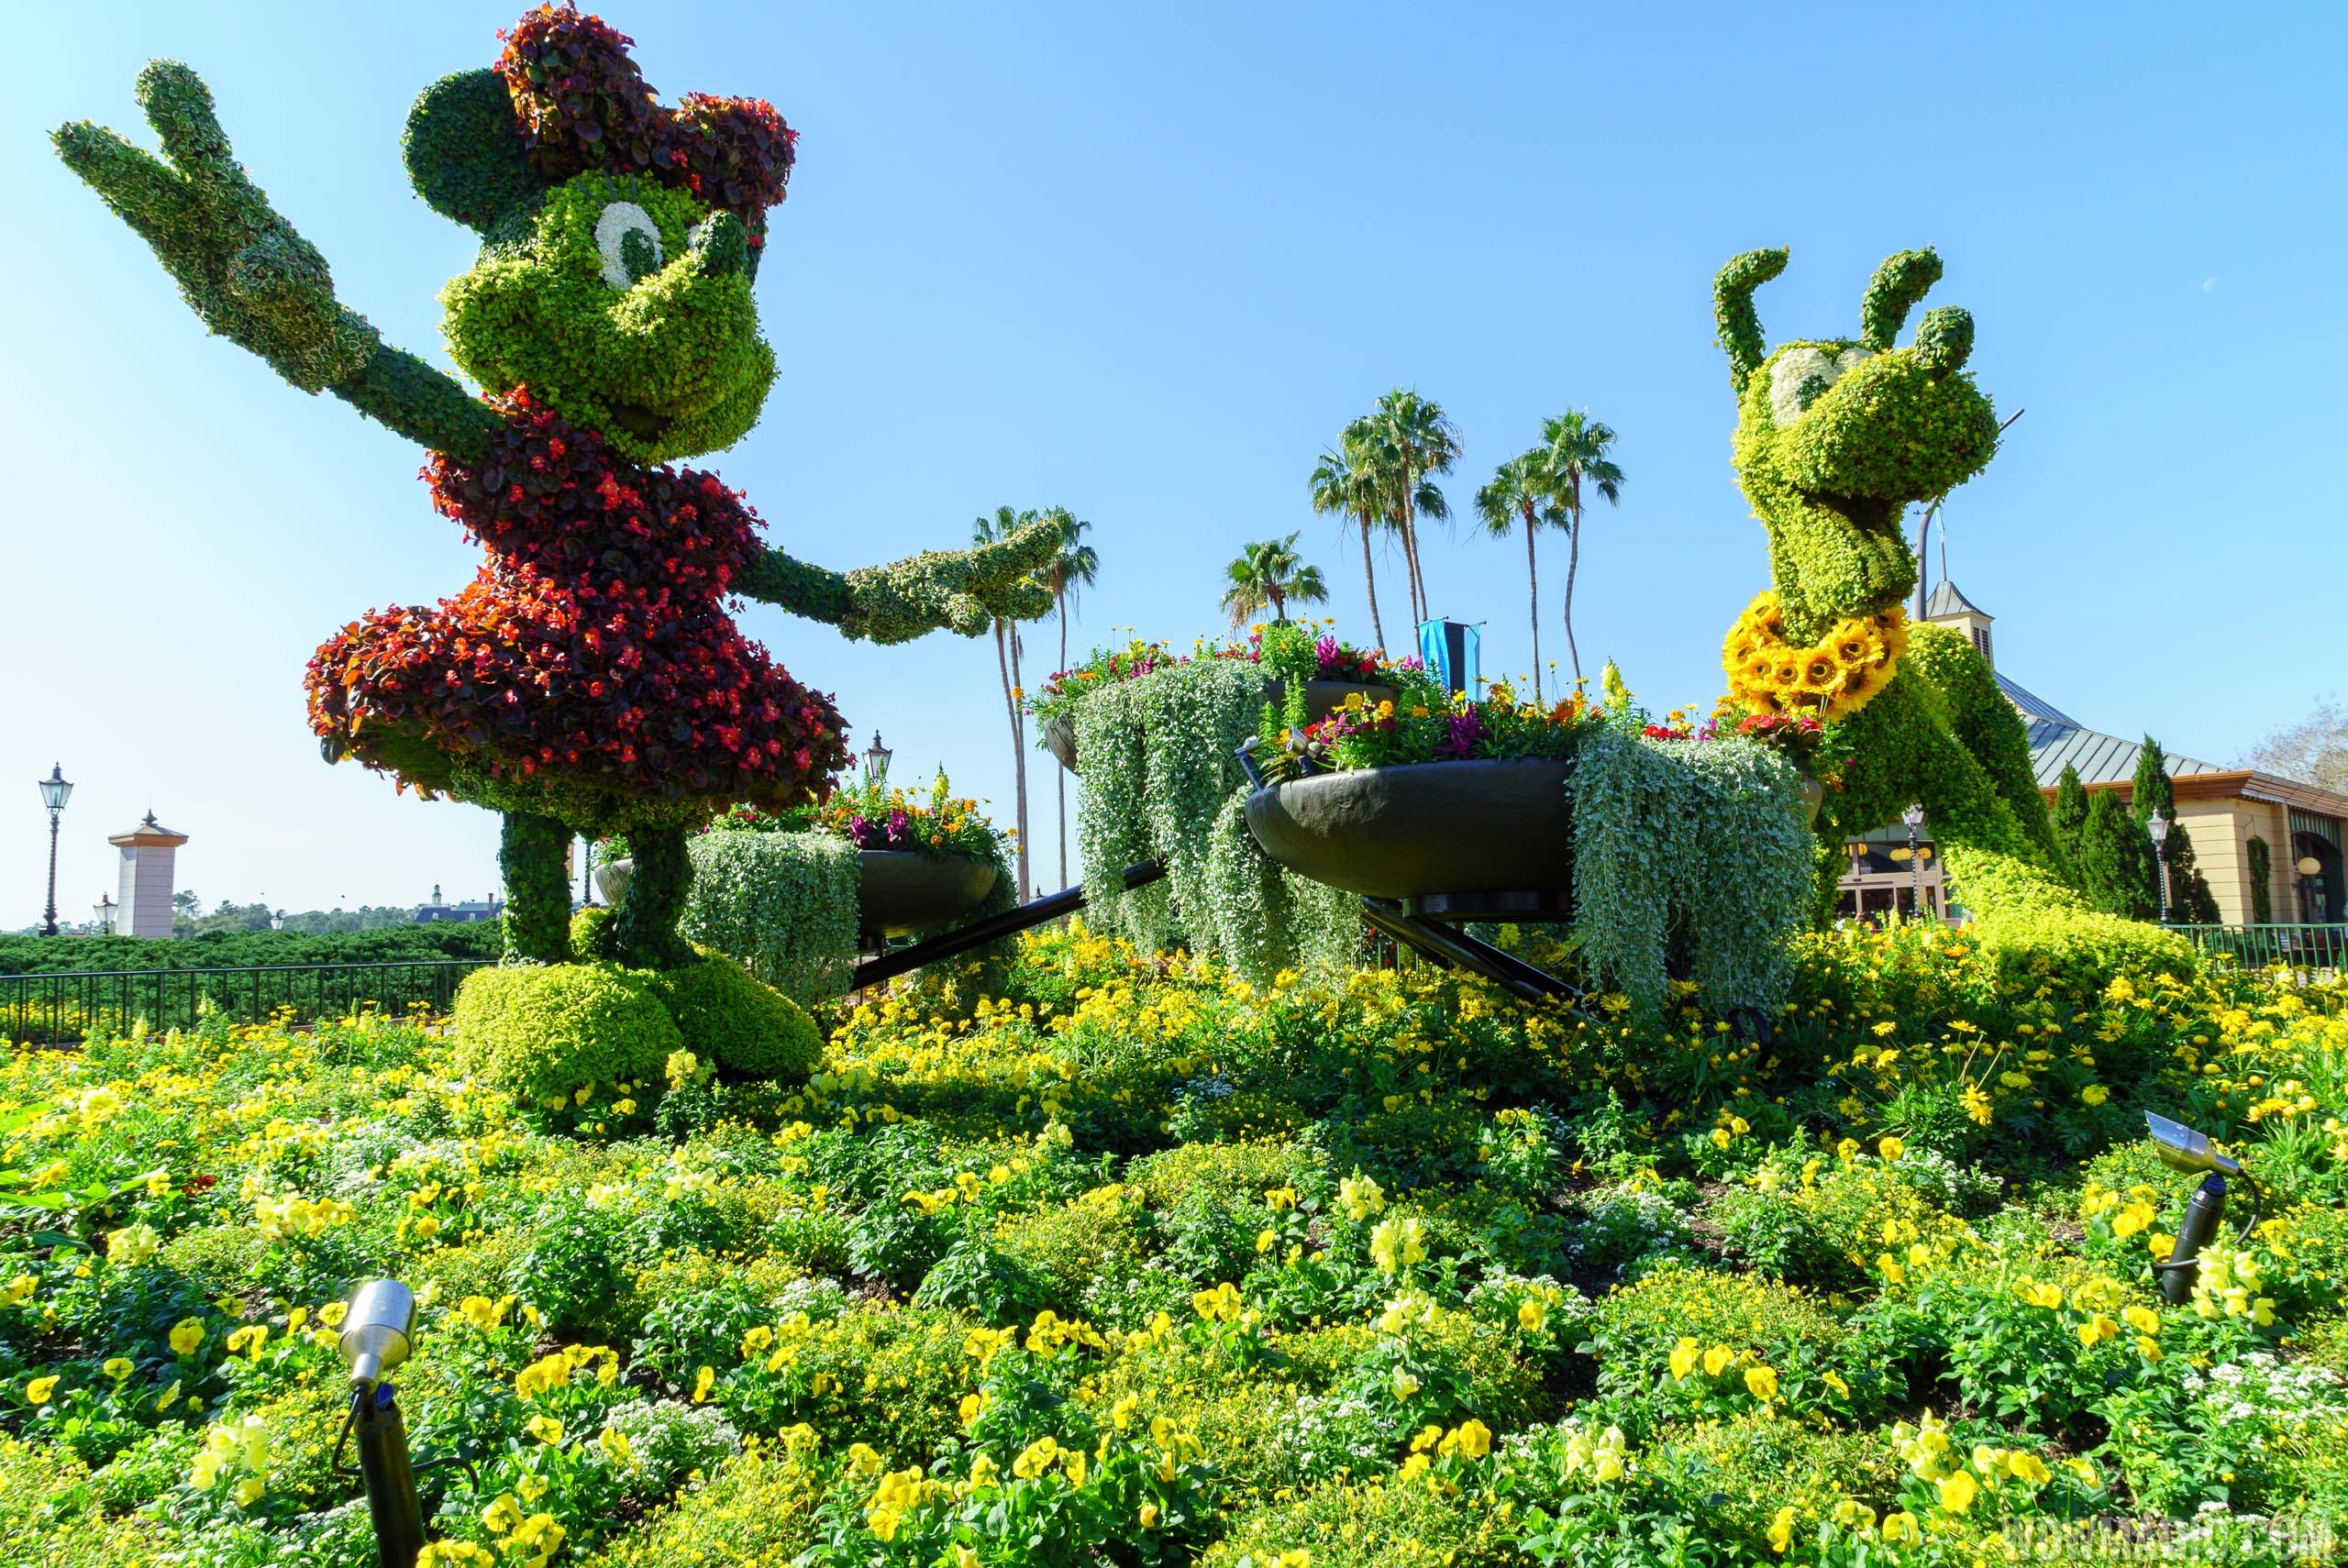 2016 Epcot International Flower and Garden Festival - Minnie Mouse and Pluto topiaries